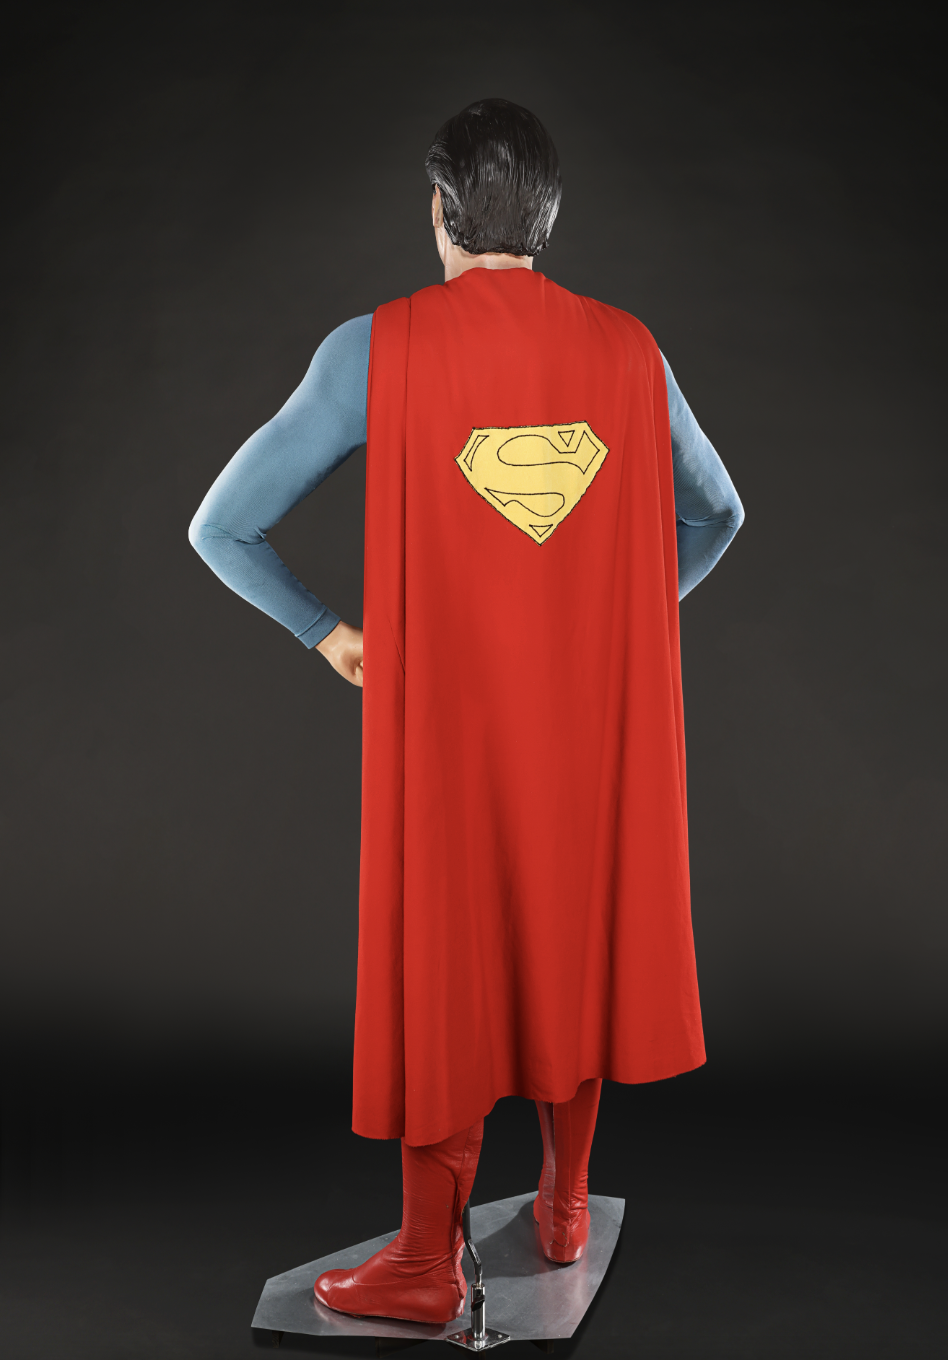 Auction sells 'Superman' costume worn by Christopher Reeve in original  movie for $350K